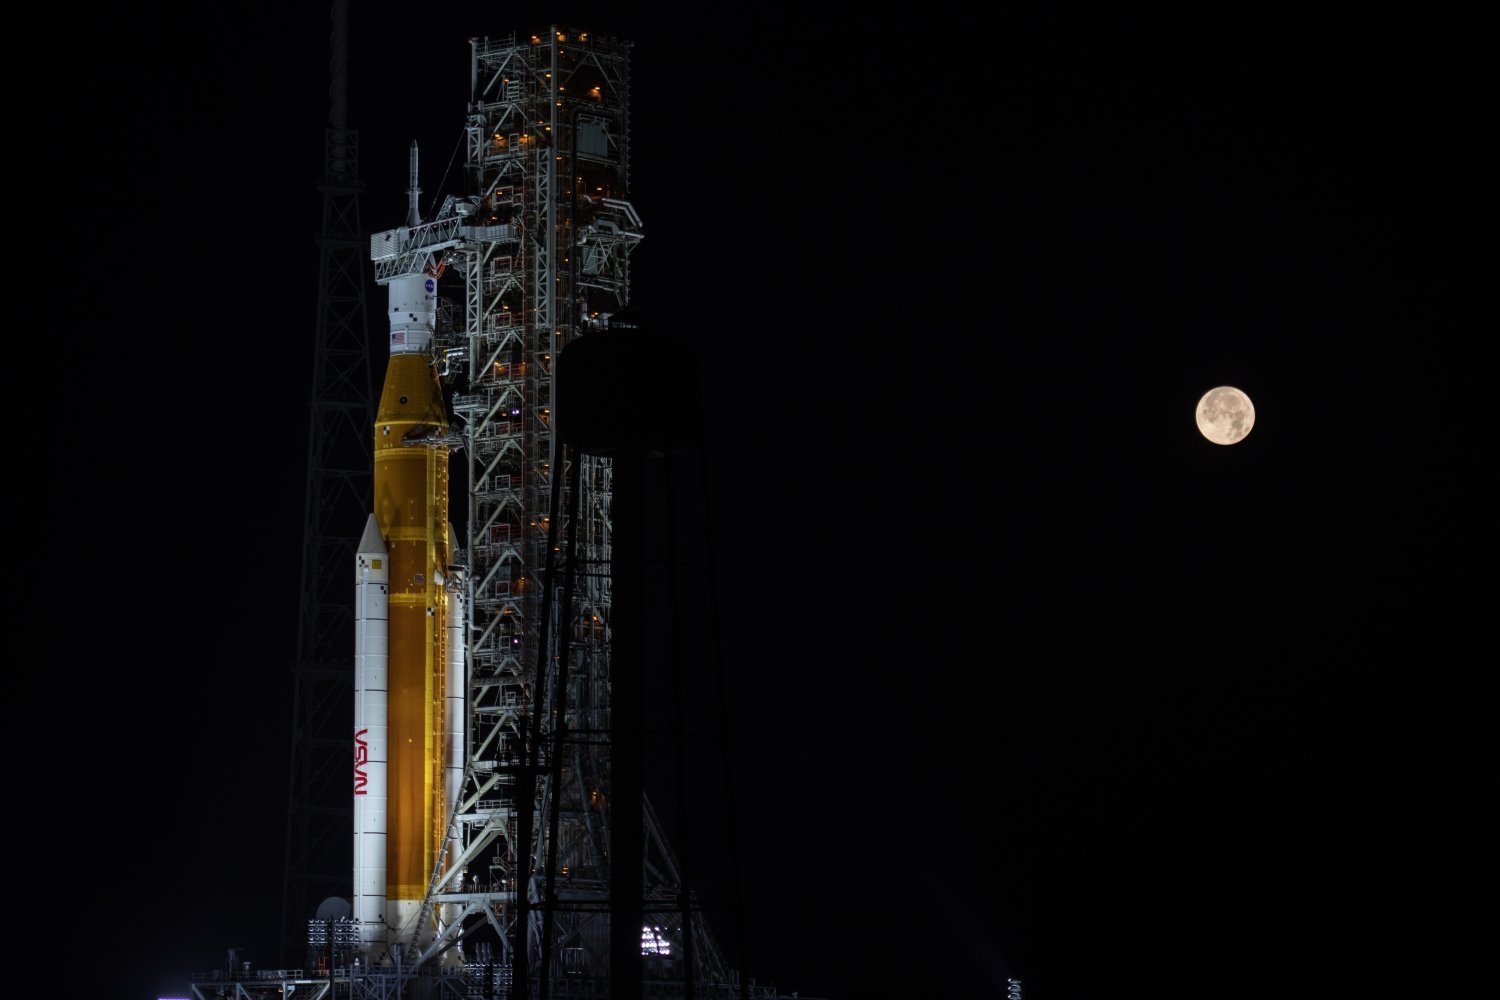 The Artemis I Space Launch System and Orion spacecraft is scheduled to take off from Launch Complex 39B at NASA’s Kennedy Space Center.